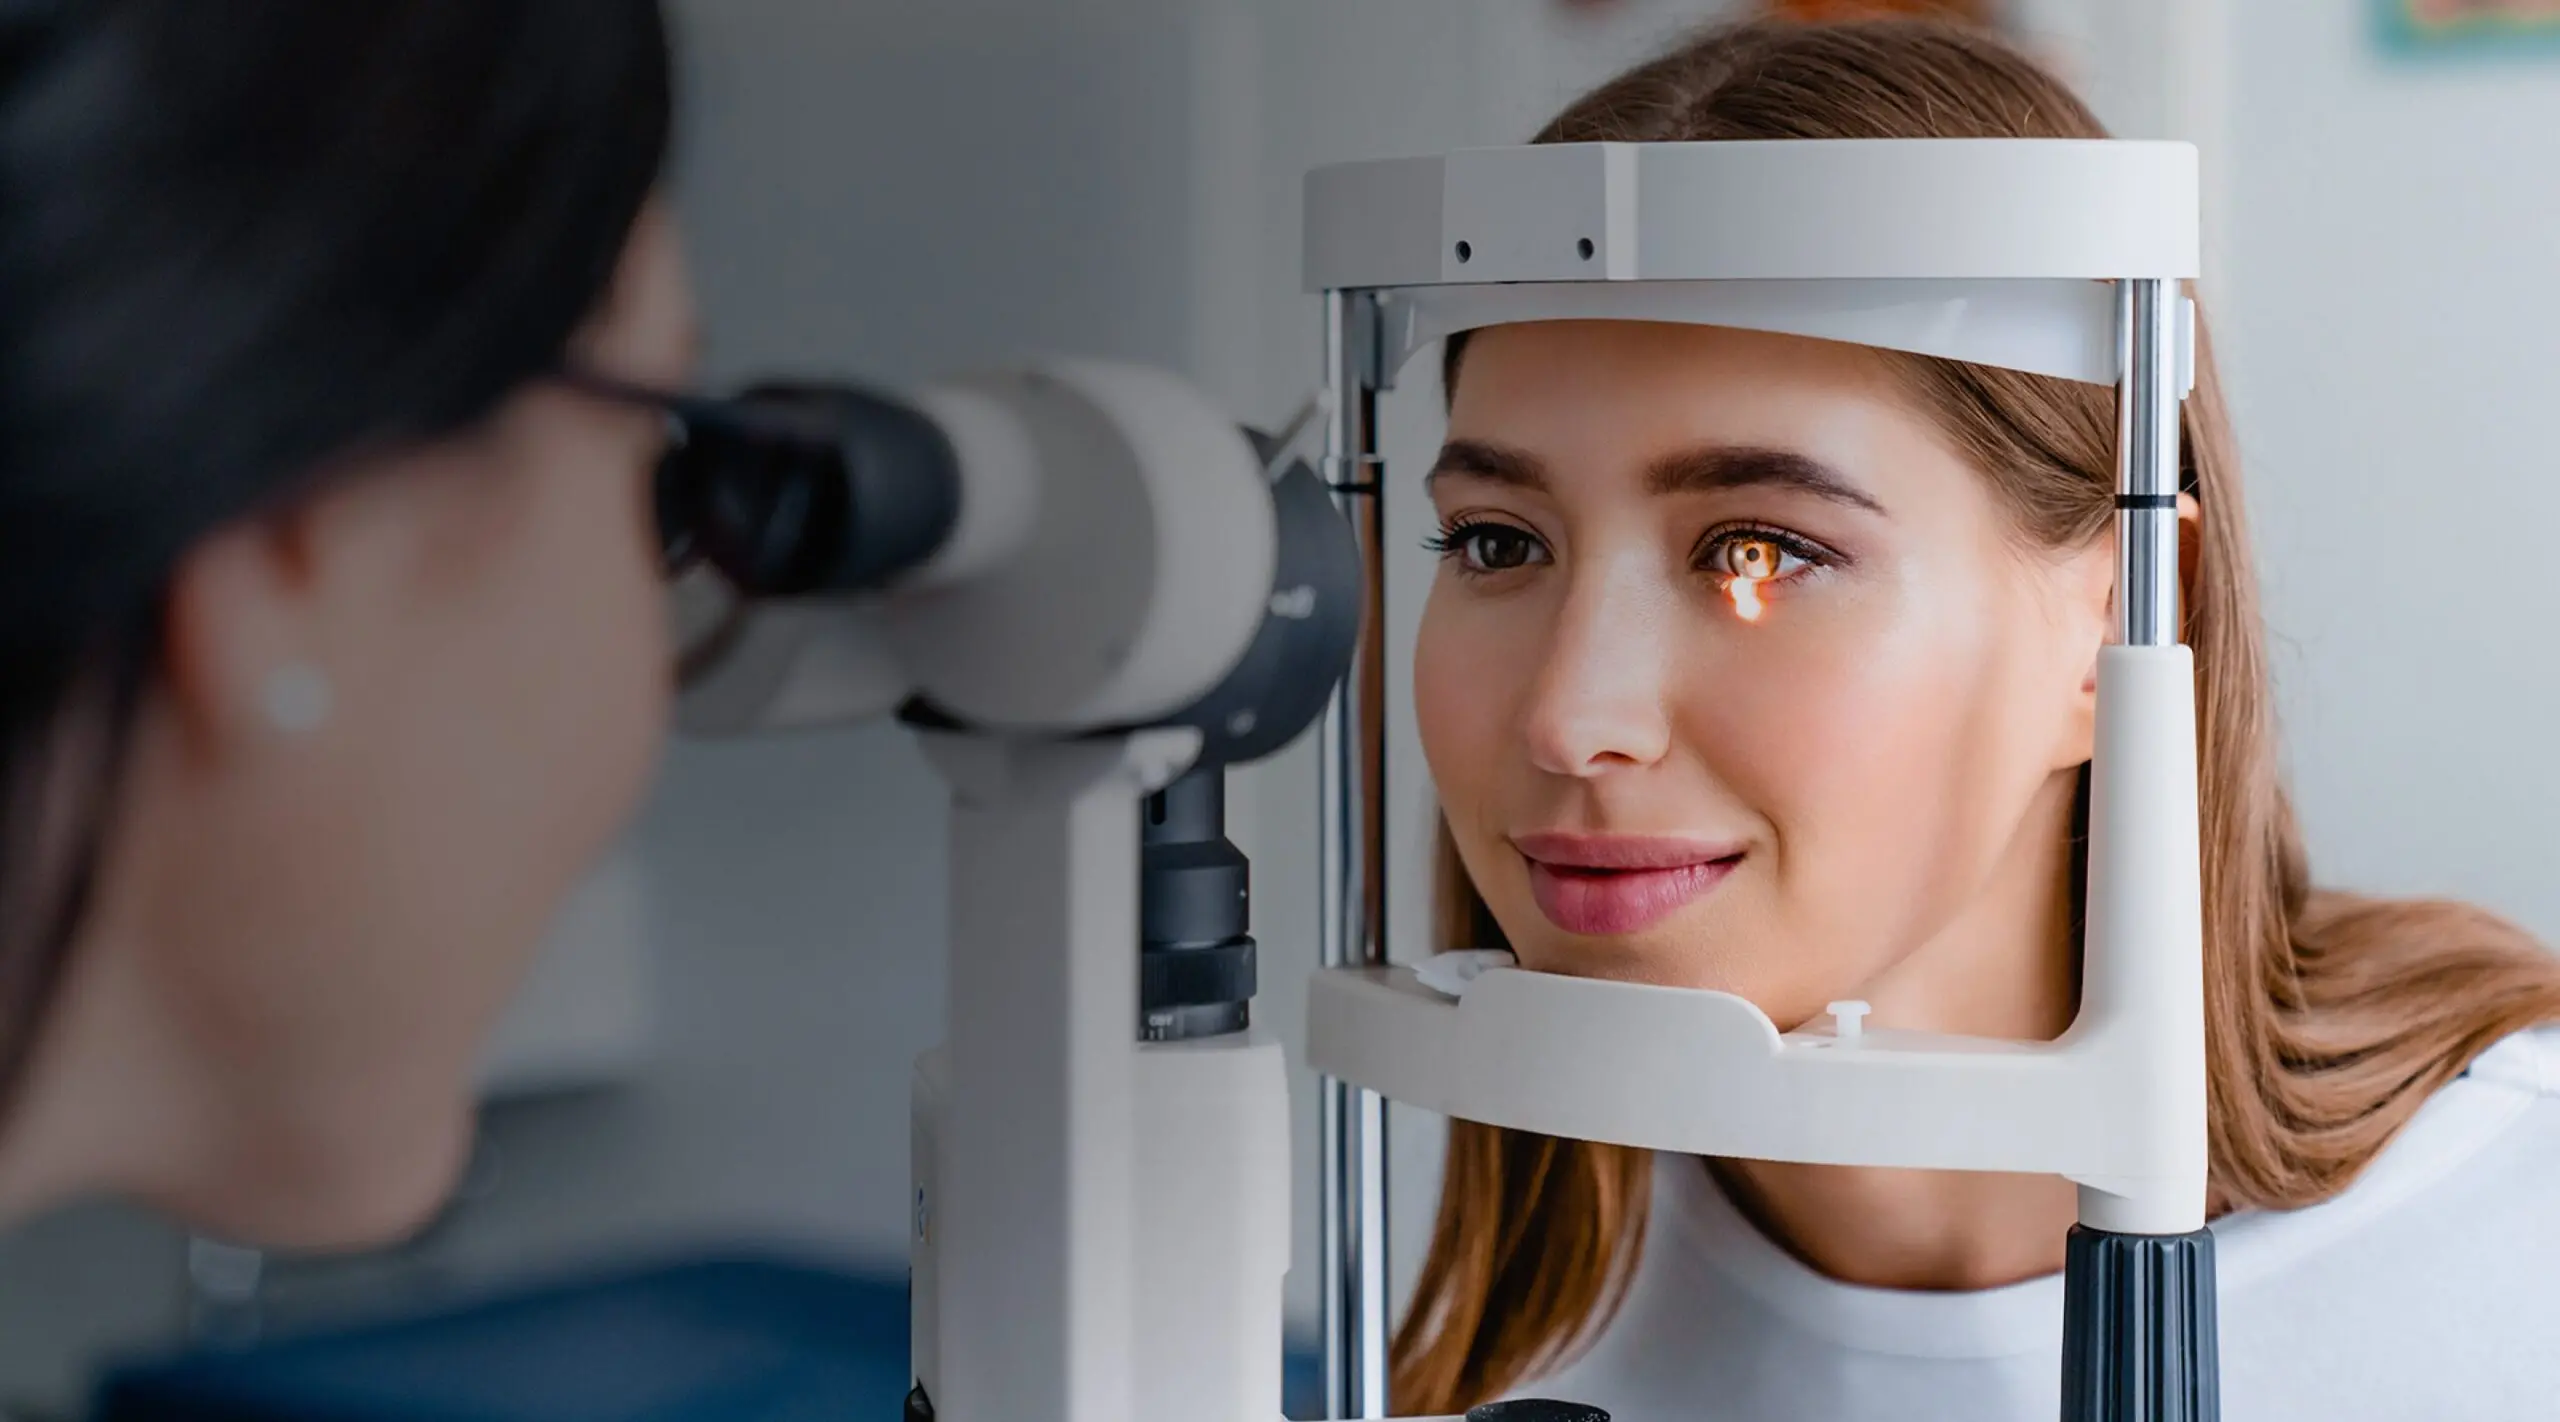 Leerink Partners Medical Technology Hero Image - Woman getting an eye exam with advanced vision technology